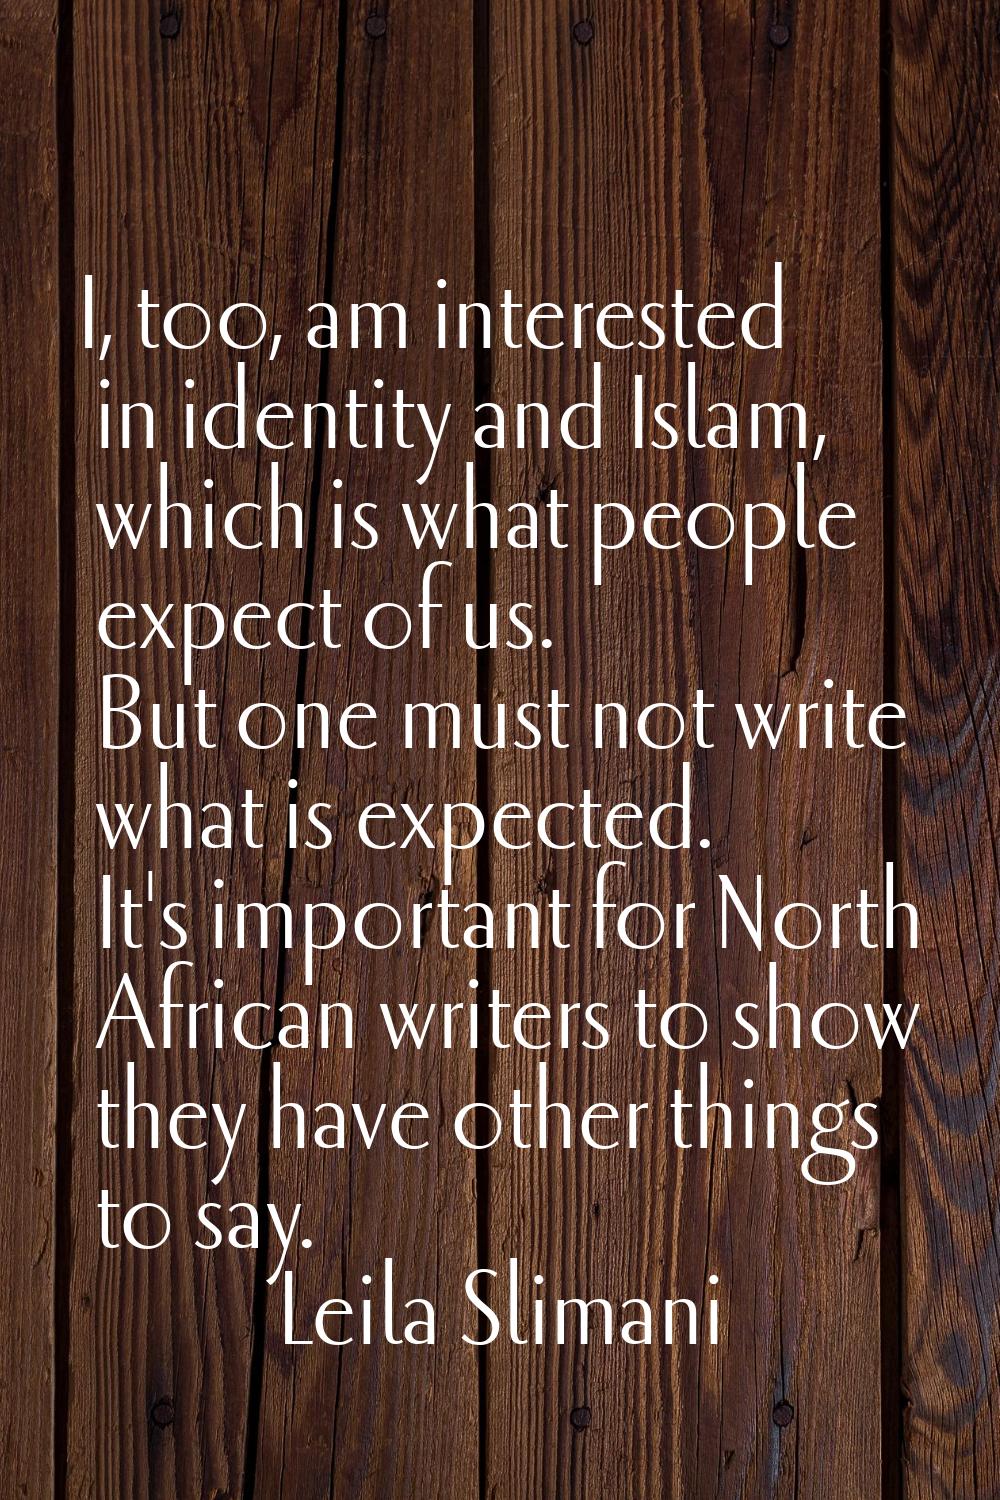 I, too, am interested in identity and Islam, which is what people expect of us. But one must not wr